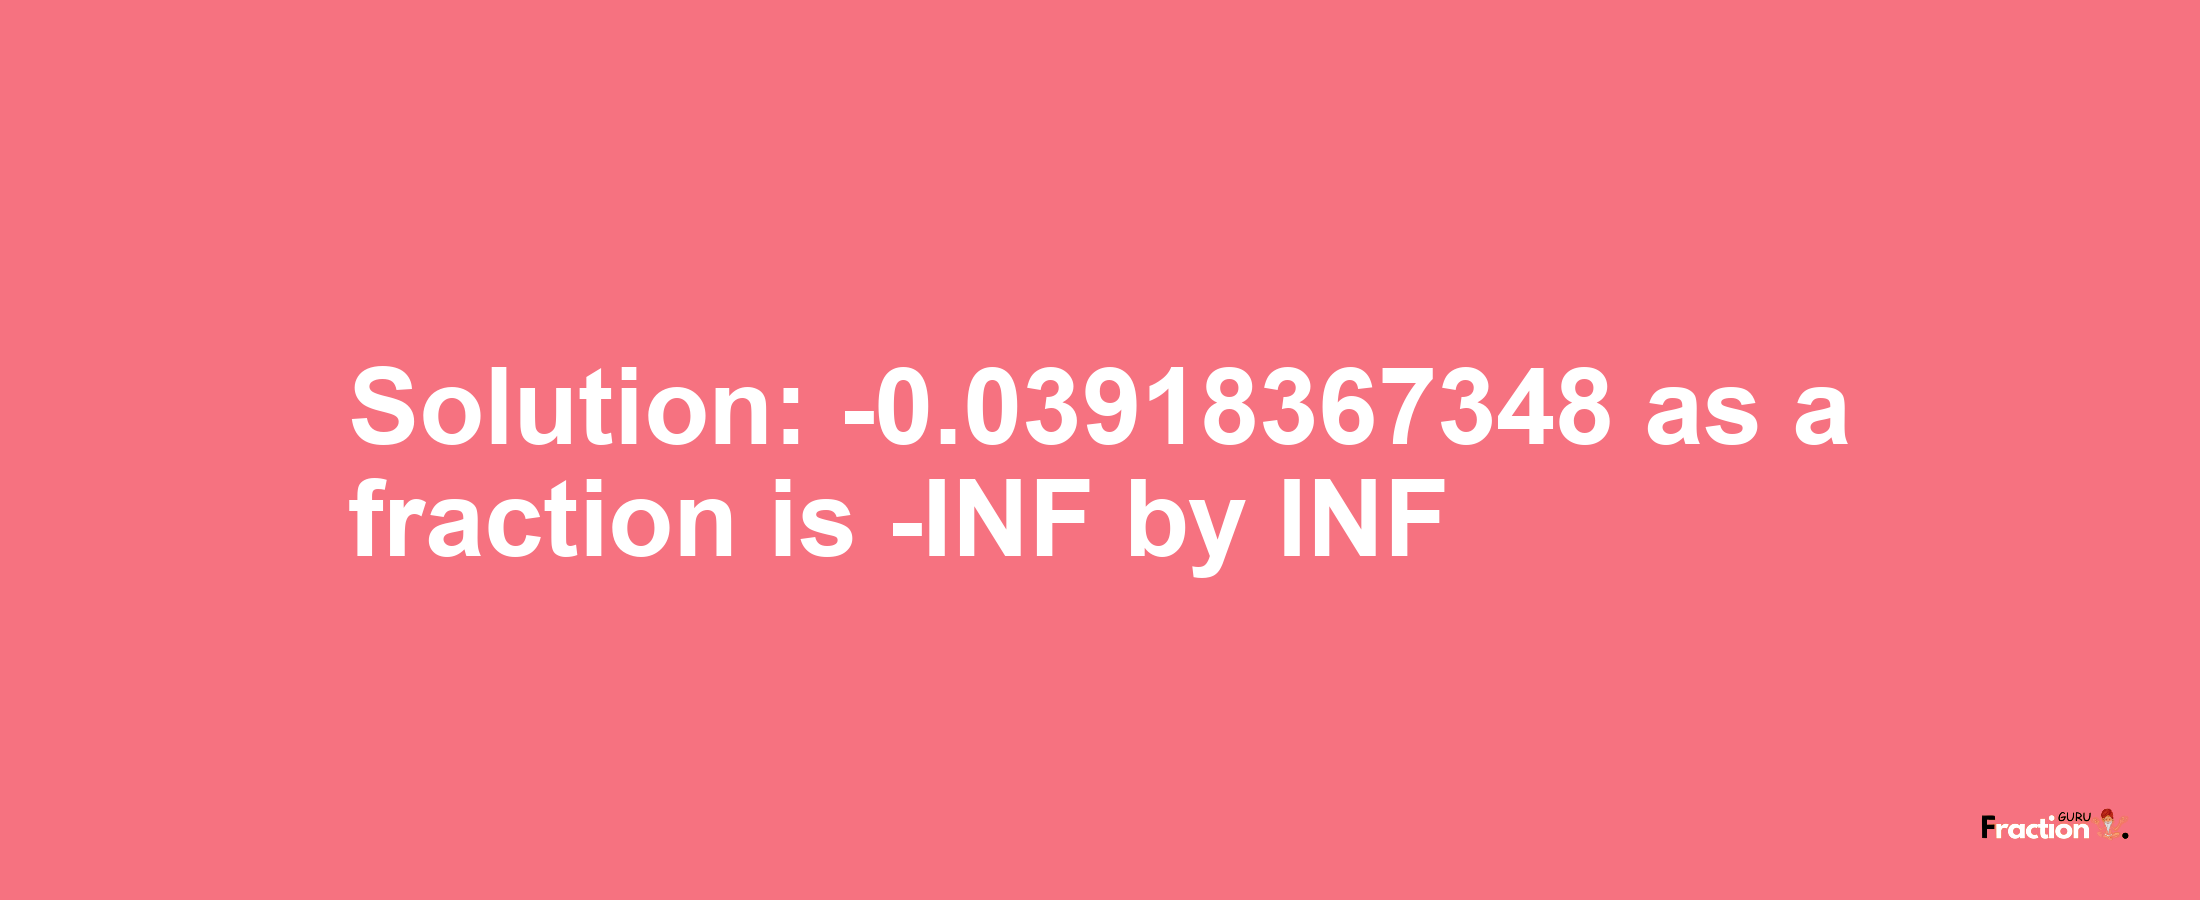 Solution:-0.03918367348 as a fraction is -INF/INF